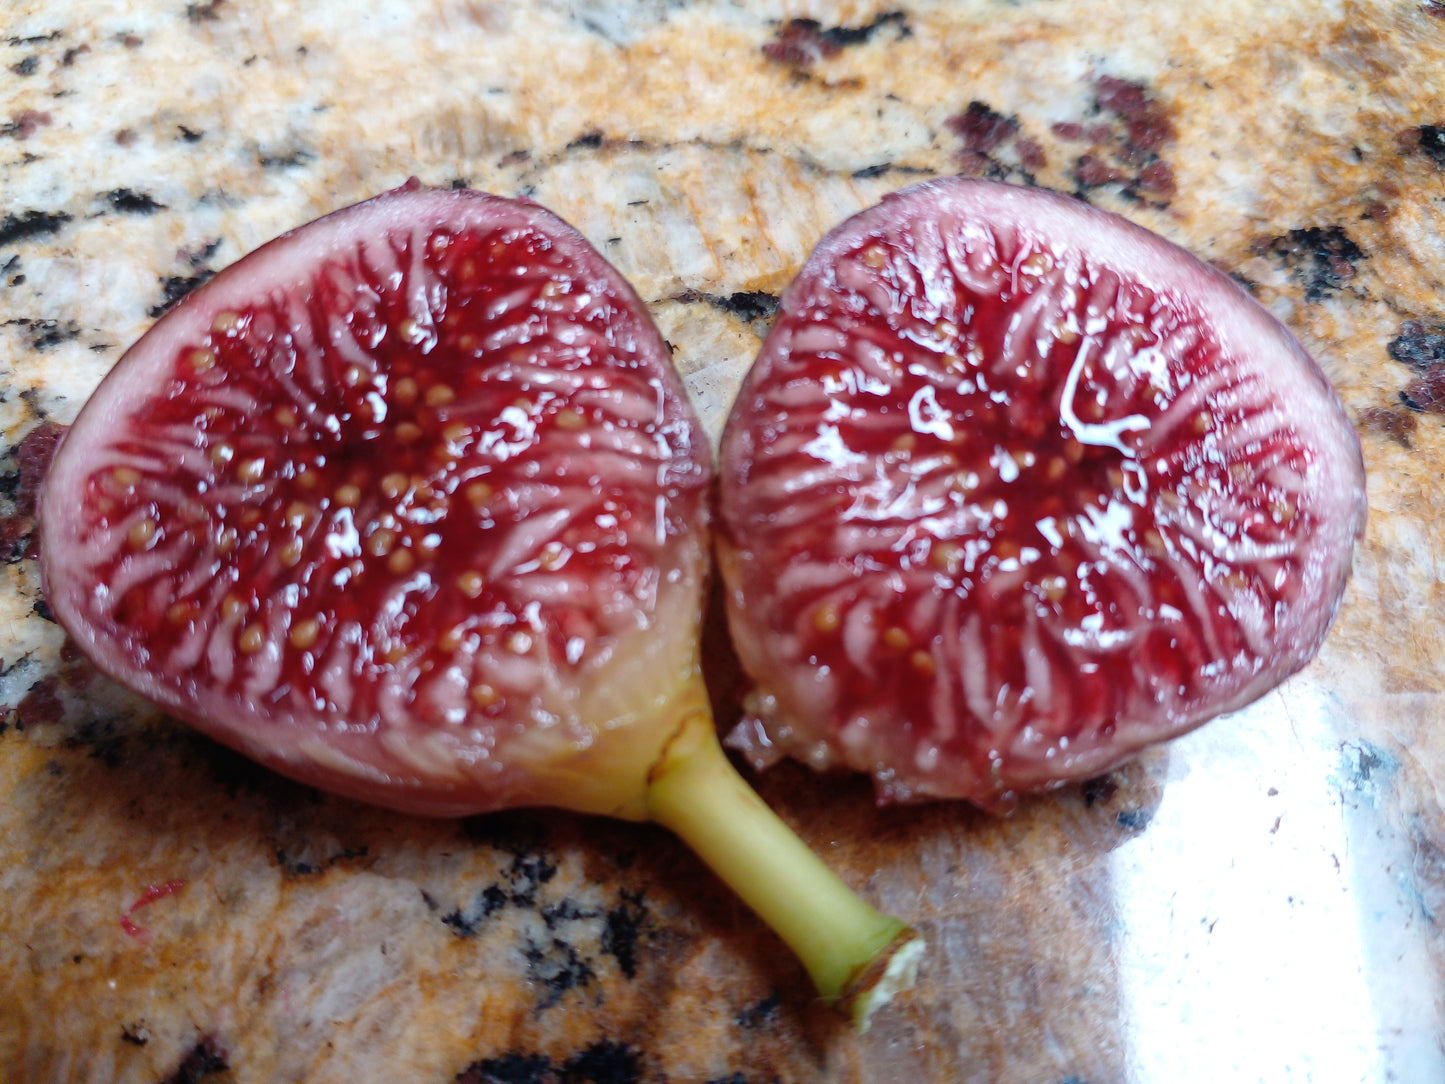 Exotica Strawberry Jam Fig - 2 Cuttings - Tasty Figs - Easy to Root